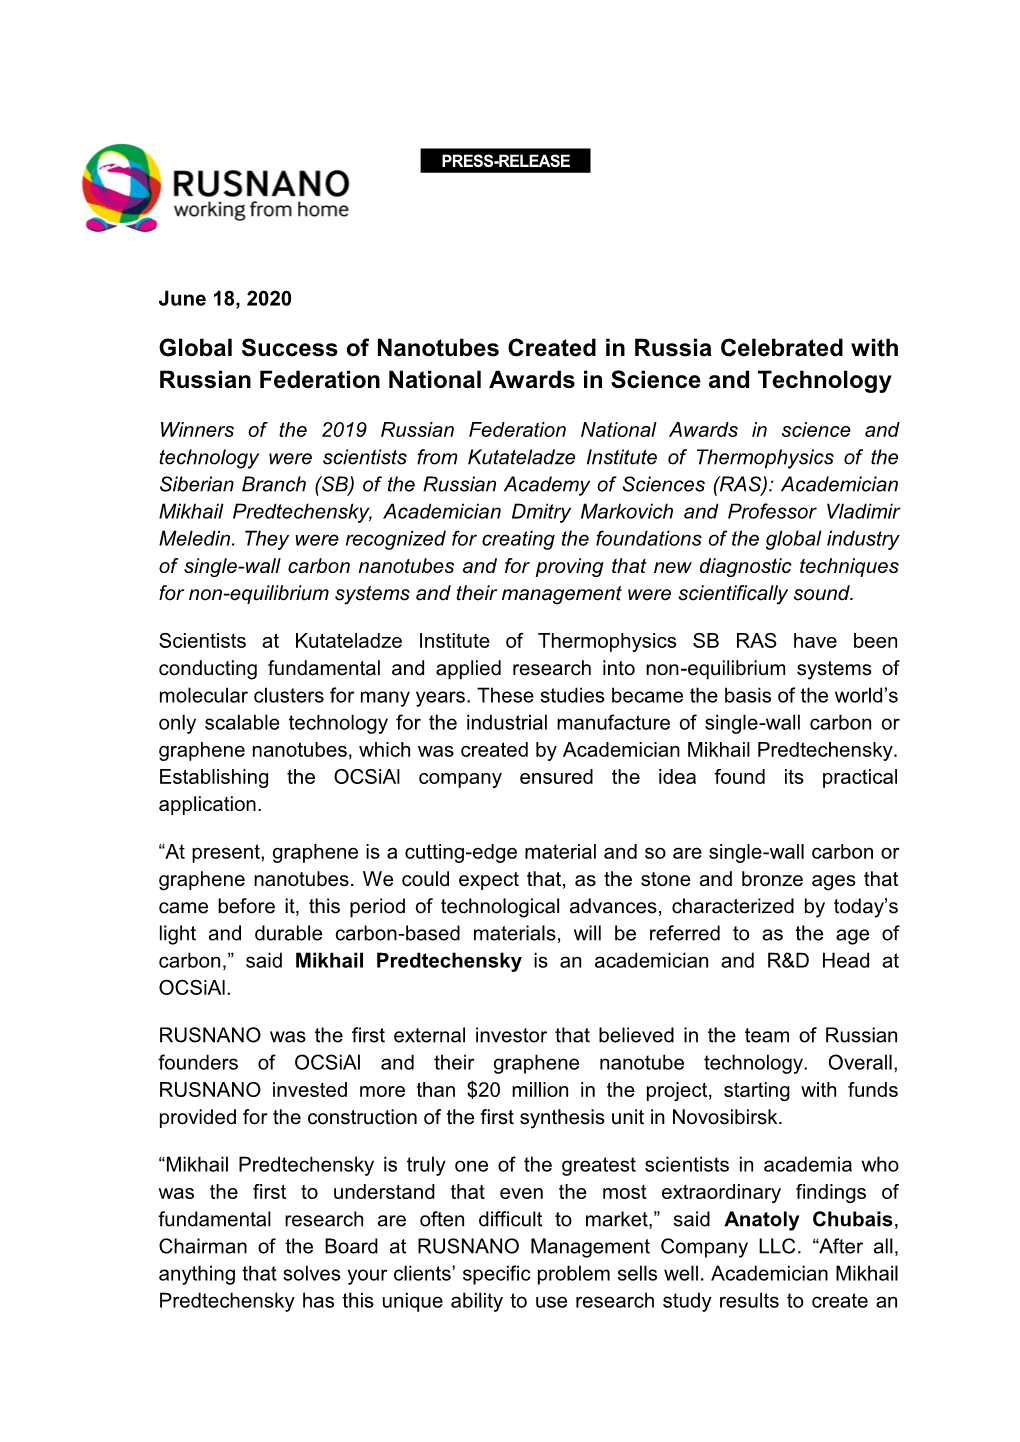 Global Success of Nanotubes Created in Russia Celebrated with Russian Federation National Awards in Science and Technology